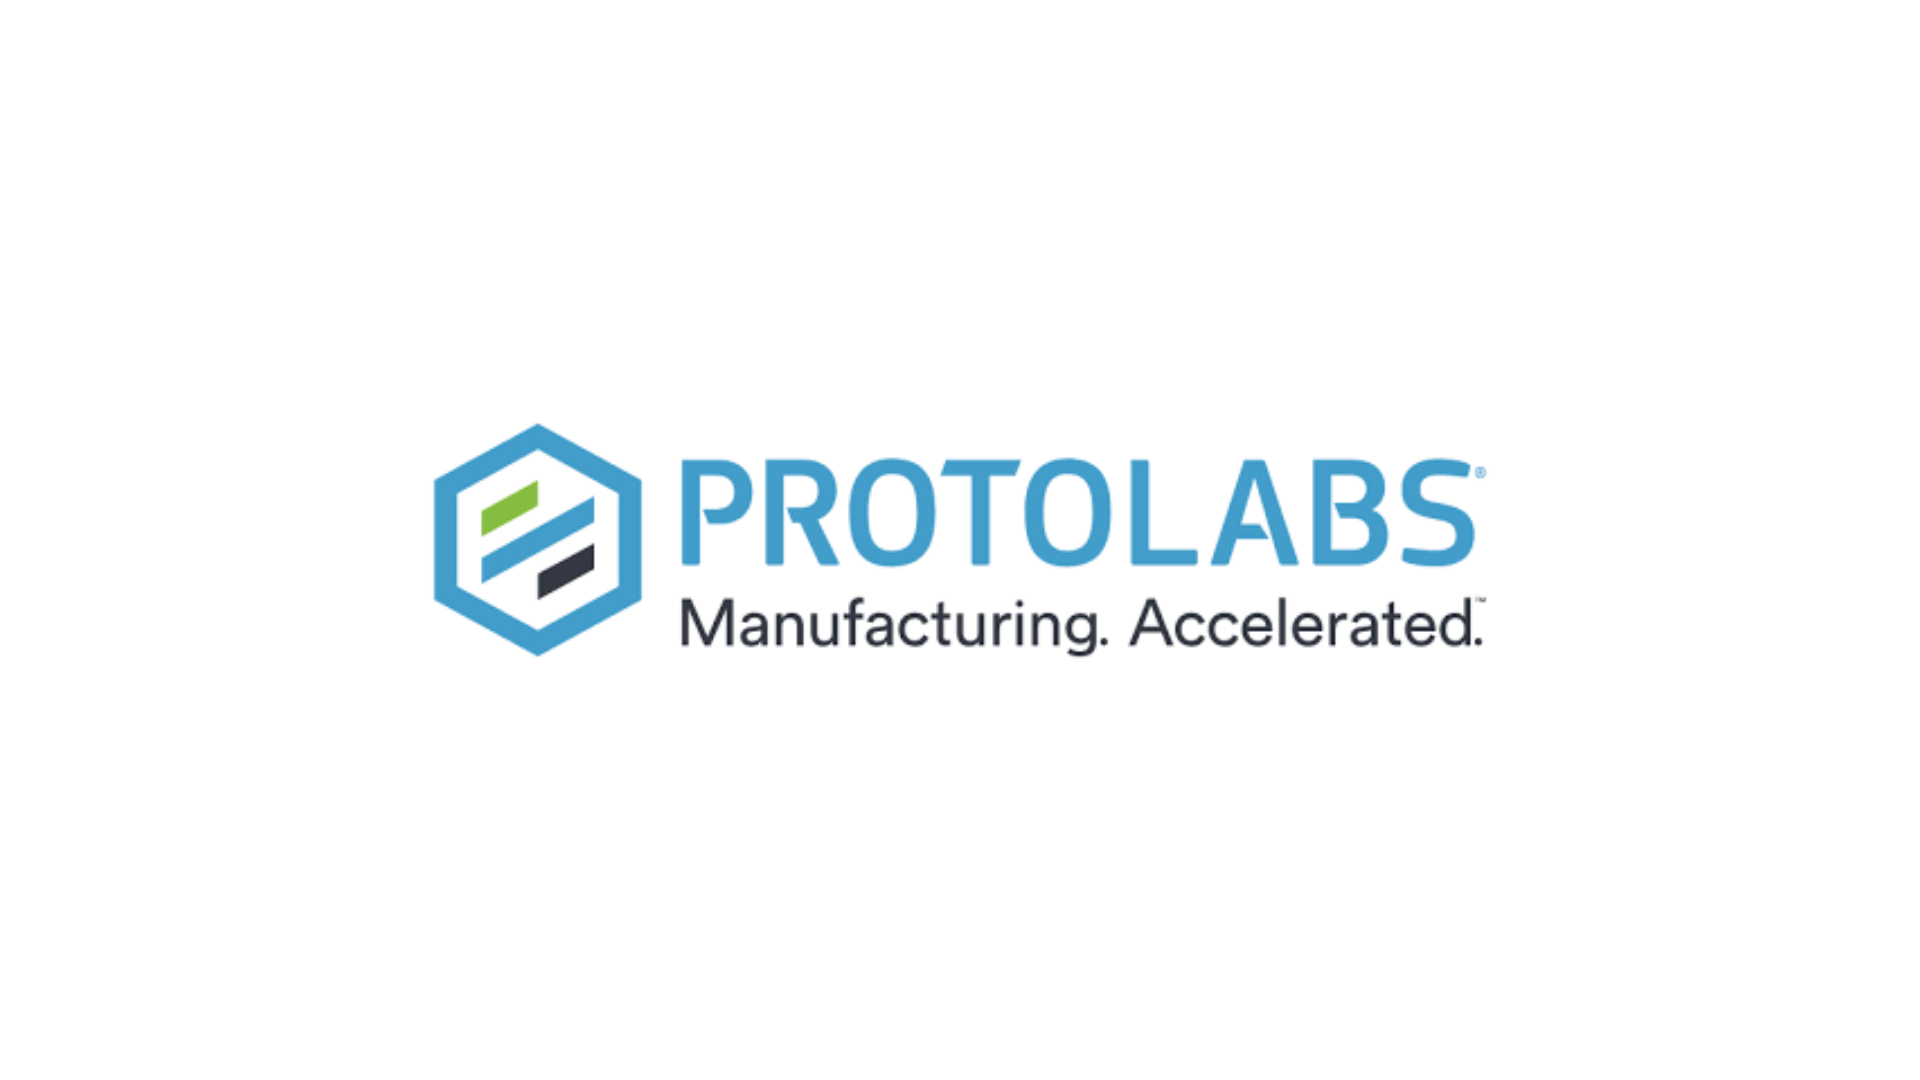 Protolabs, an online and technology-enabled manufacturer, announced Oleg Ryaboy as its new Global Chief Technology Officer effective September 9, 2022.